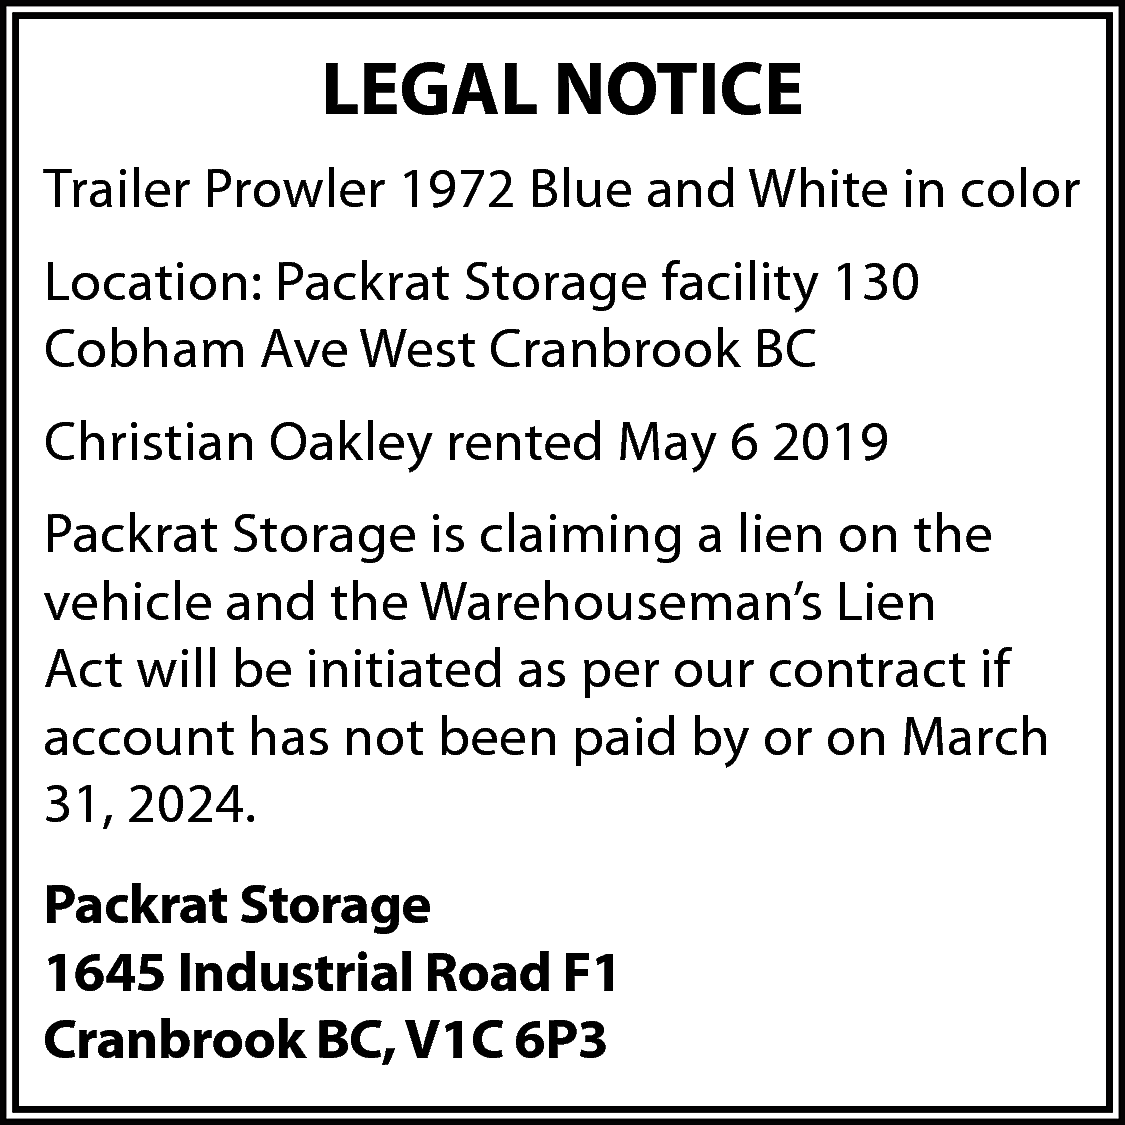 LEGAL NOTICE <br>Trailer Prowler 1972  LEGAL NOTICE  Trailer Prowler 1972 Blue and White in color  Location: Packrat Storage facility 130  Cobham Ave West Cranbrook BC  Christian Oakley rented May 6 2019  Packrat Storage is claiming a lien on the  vehicle and the Warehouseman’s Lien  Act will be initiated as per our contract if  account has not been paid by or on March  31, 2024.  Packrat Storage  1645 Industrial Road F1  Cranbrook BC, V1C 6P3    